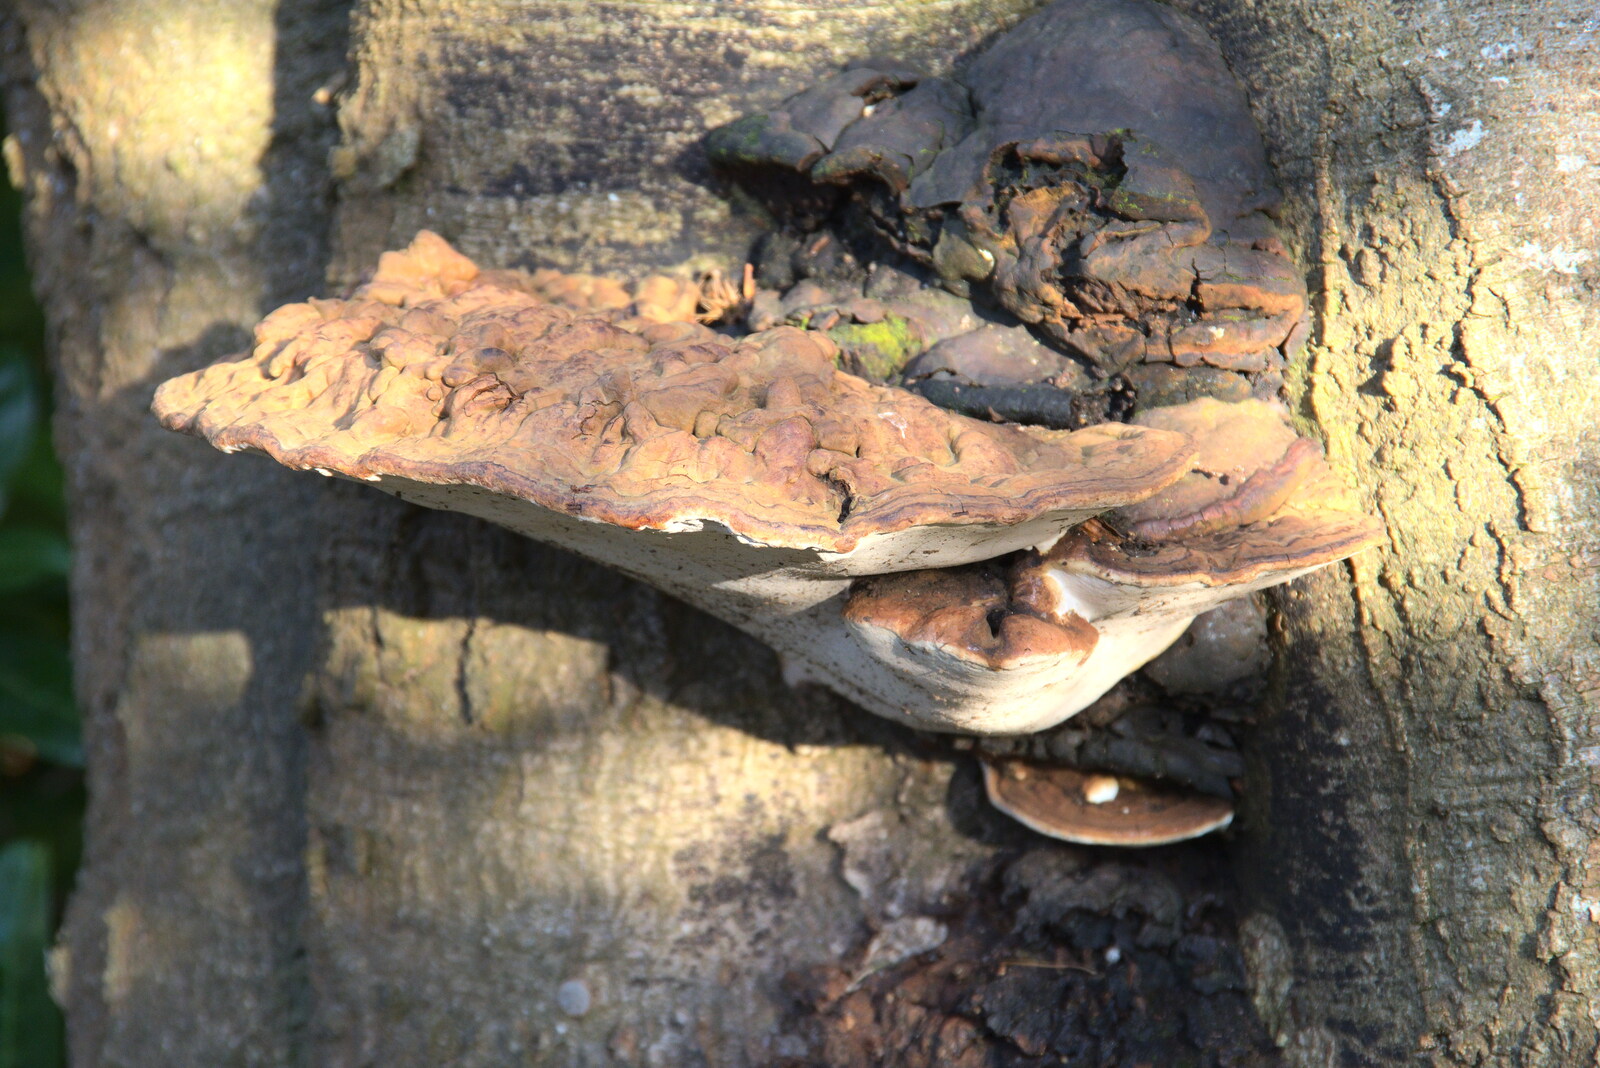 Chunky bracket fungus on a tree from A Visit to Blickling Hall, Aylsham, Norfolk - 9th January 2022